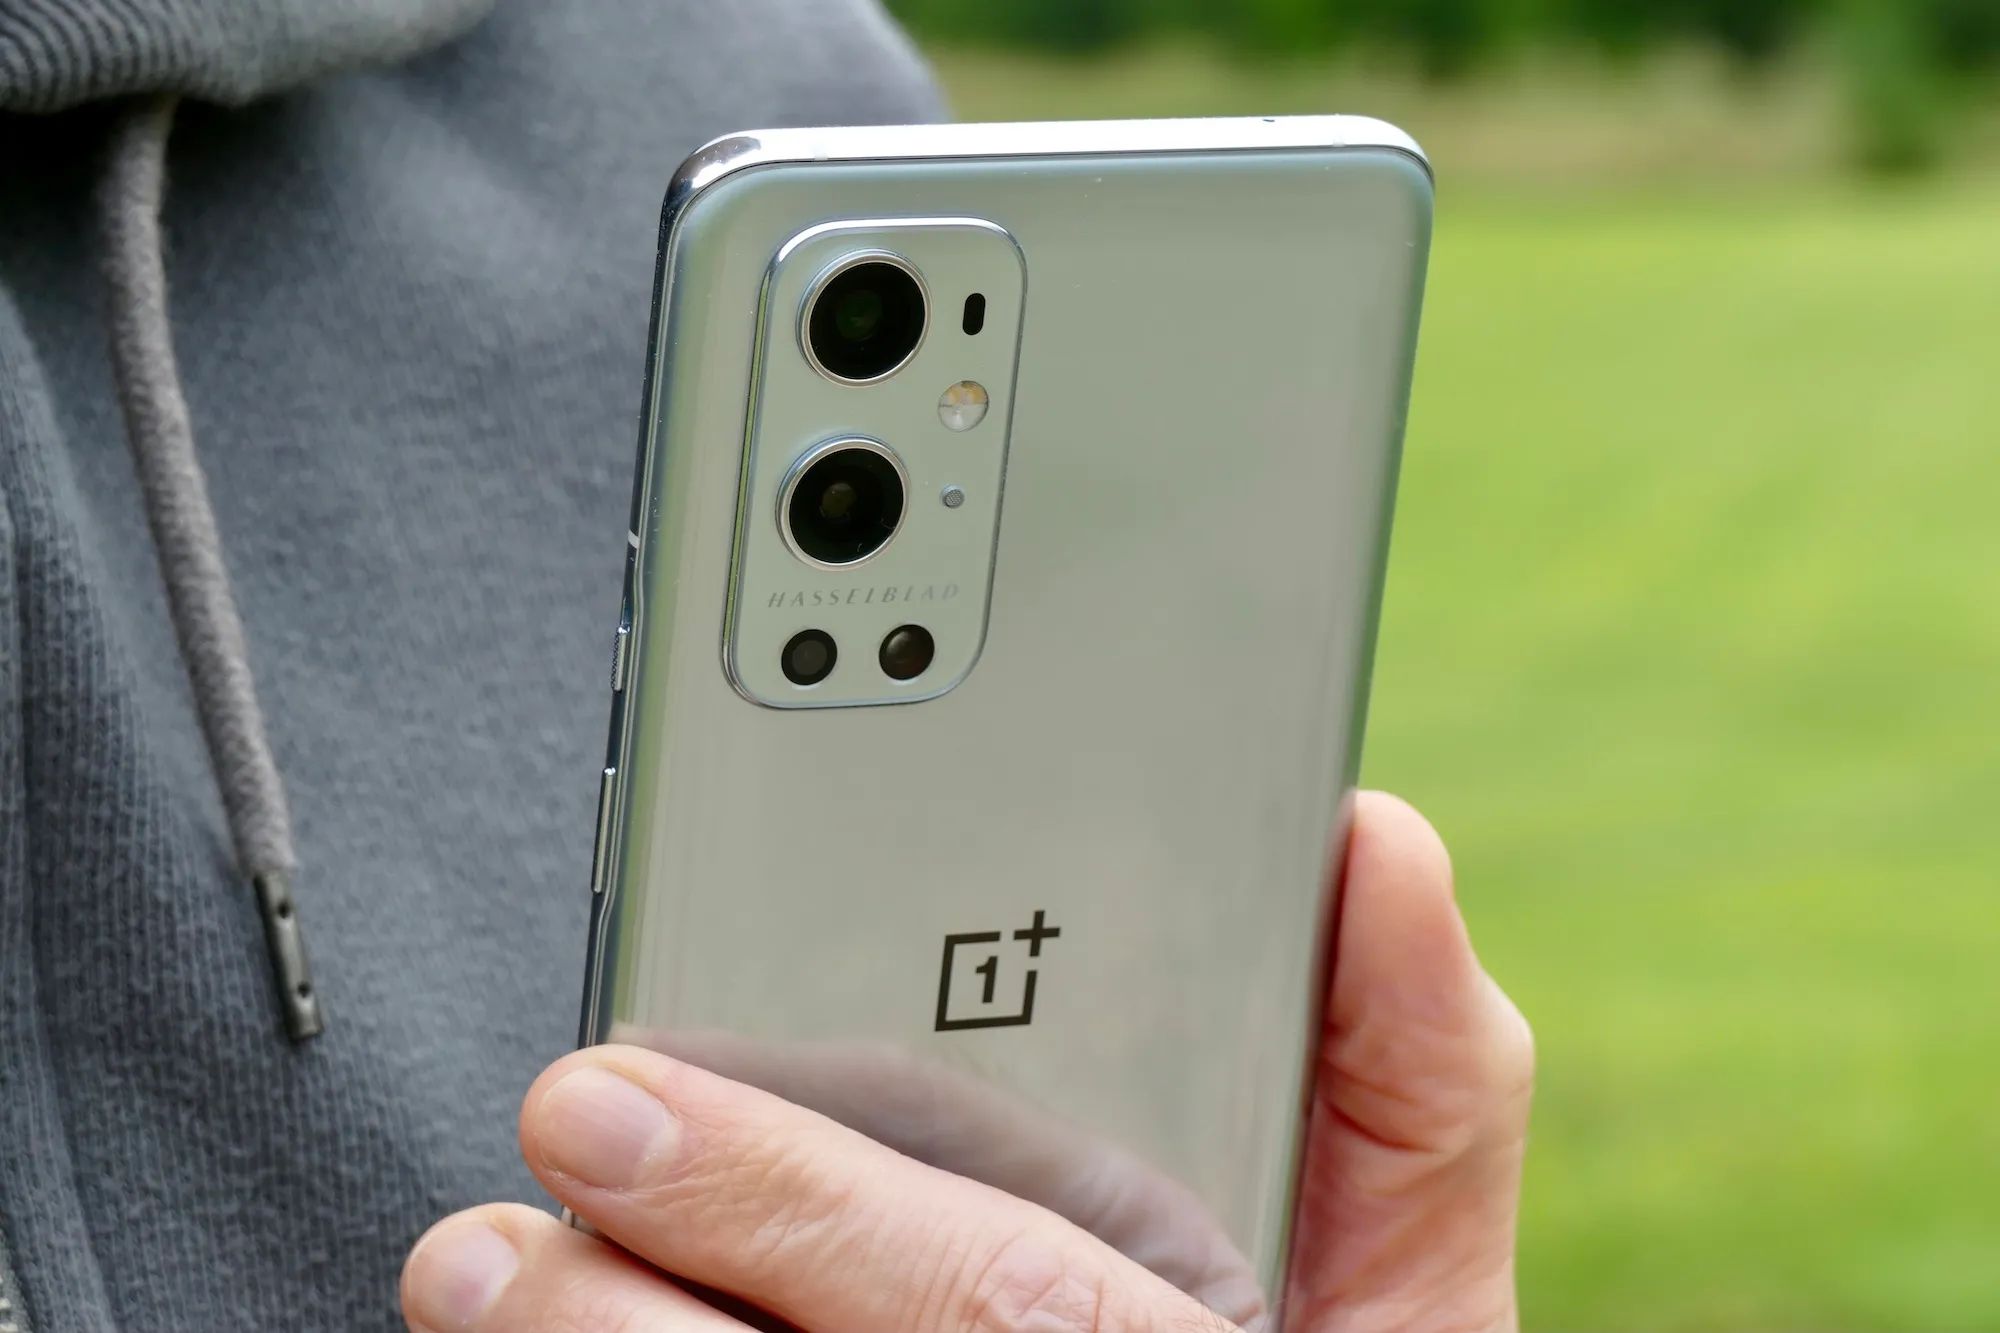 Resetting OnePlus 9 Pro: Step-by-Step Instructions